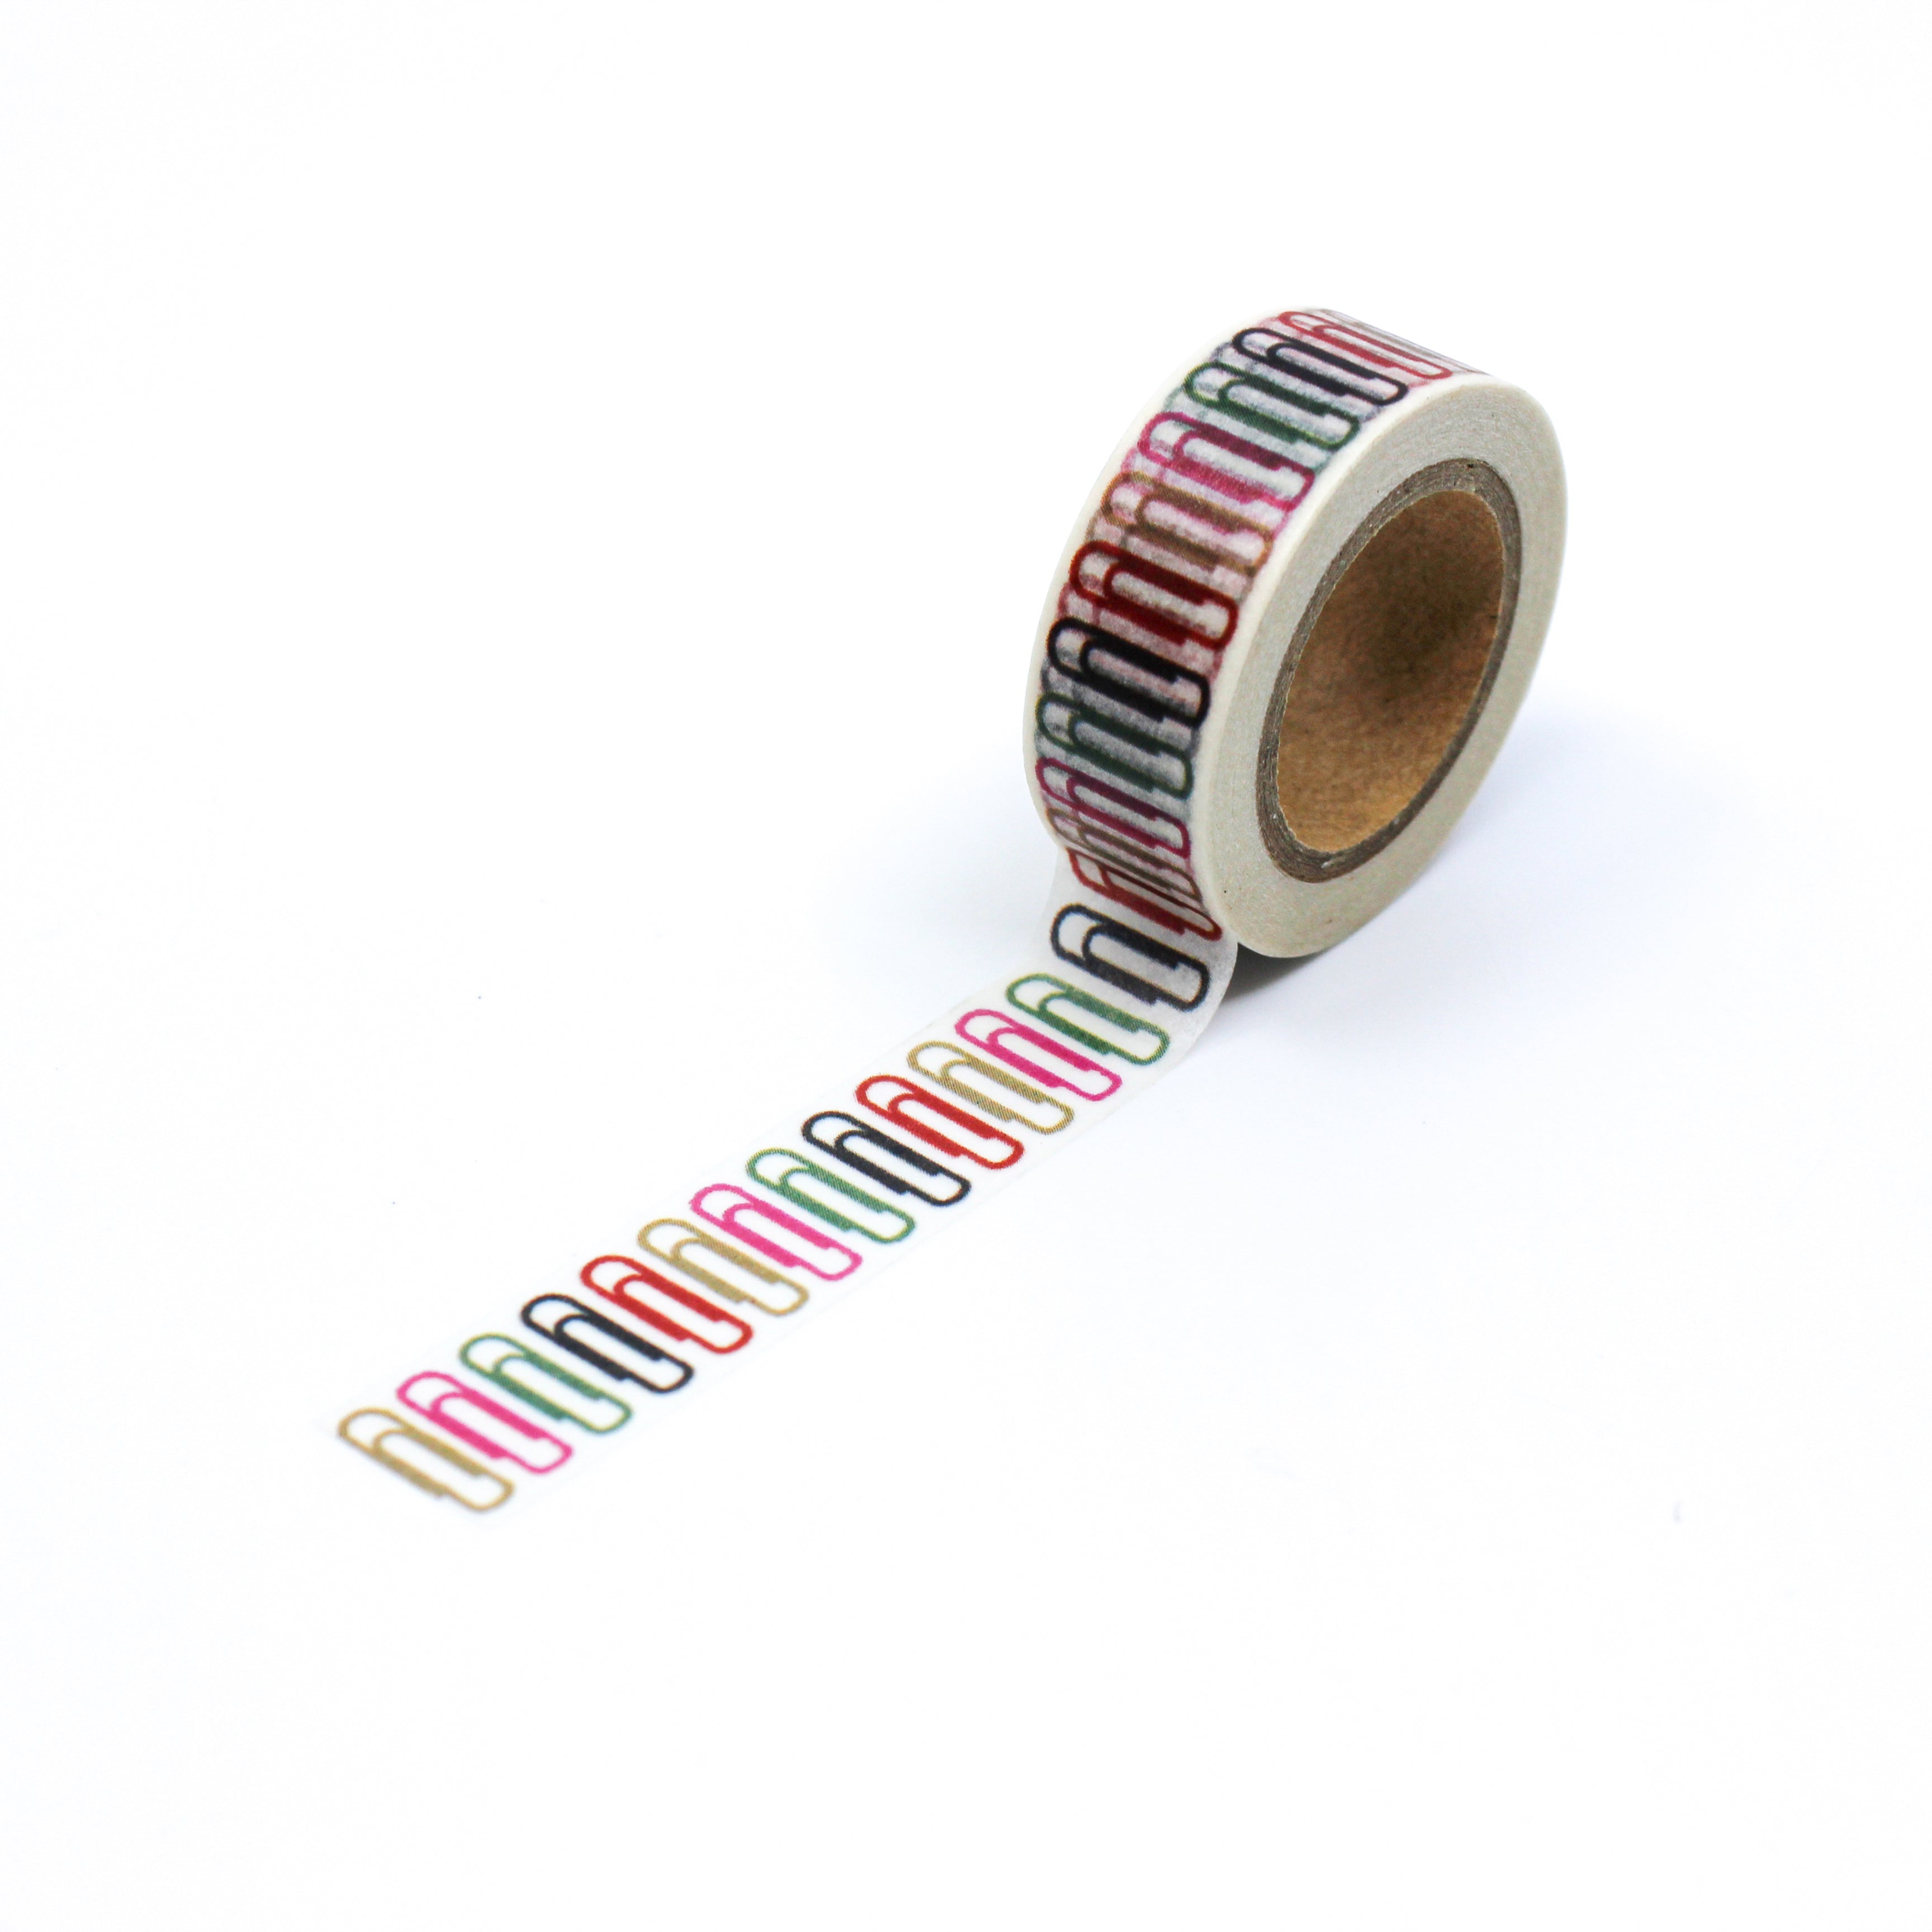 This is a full pattern repeat view of different color of paper clips pattern Washi Tape from BBB Supplies Craft Shop